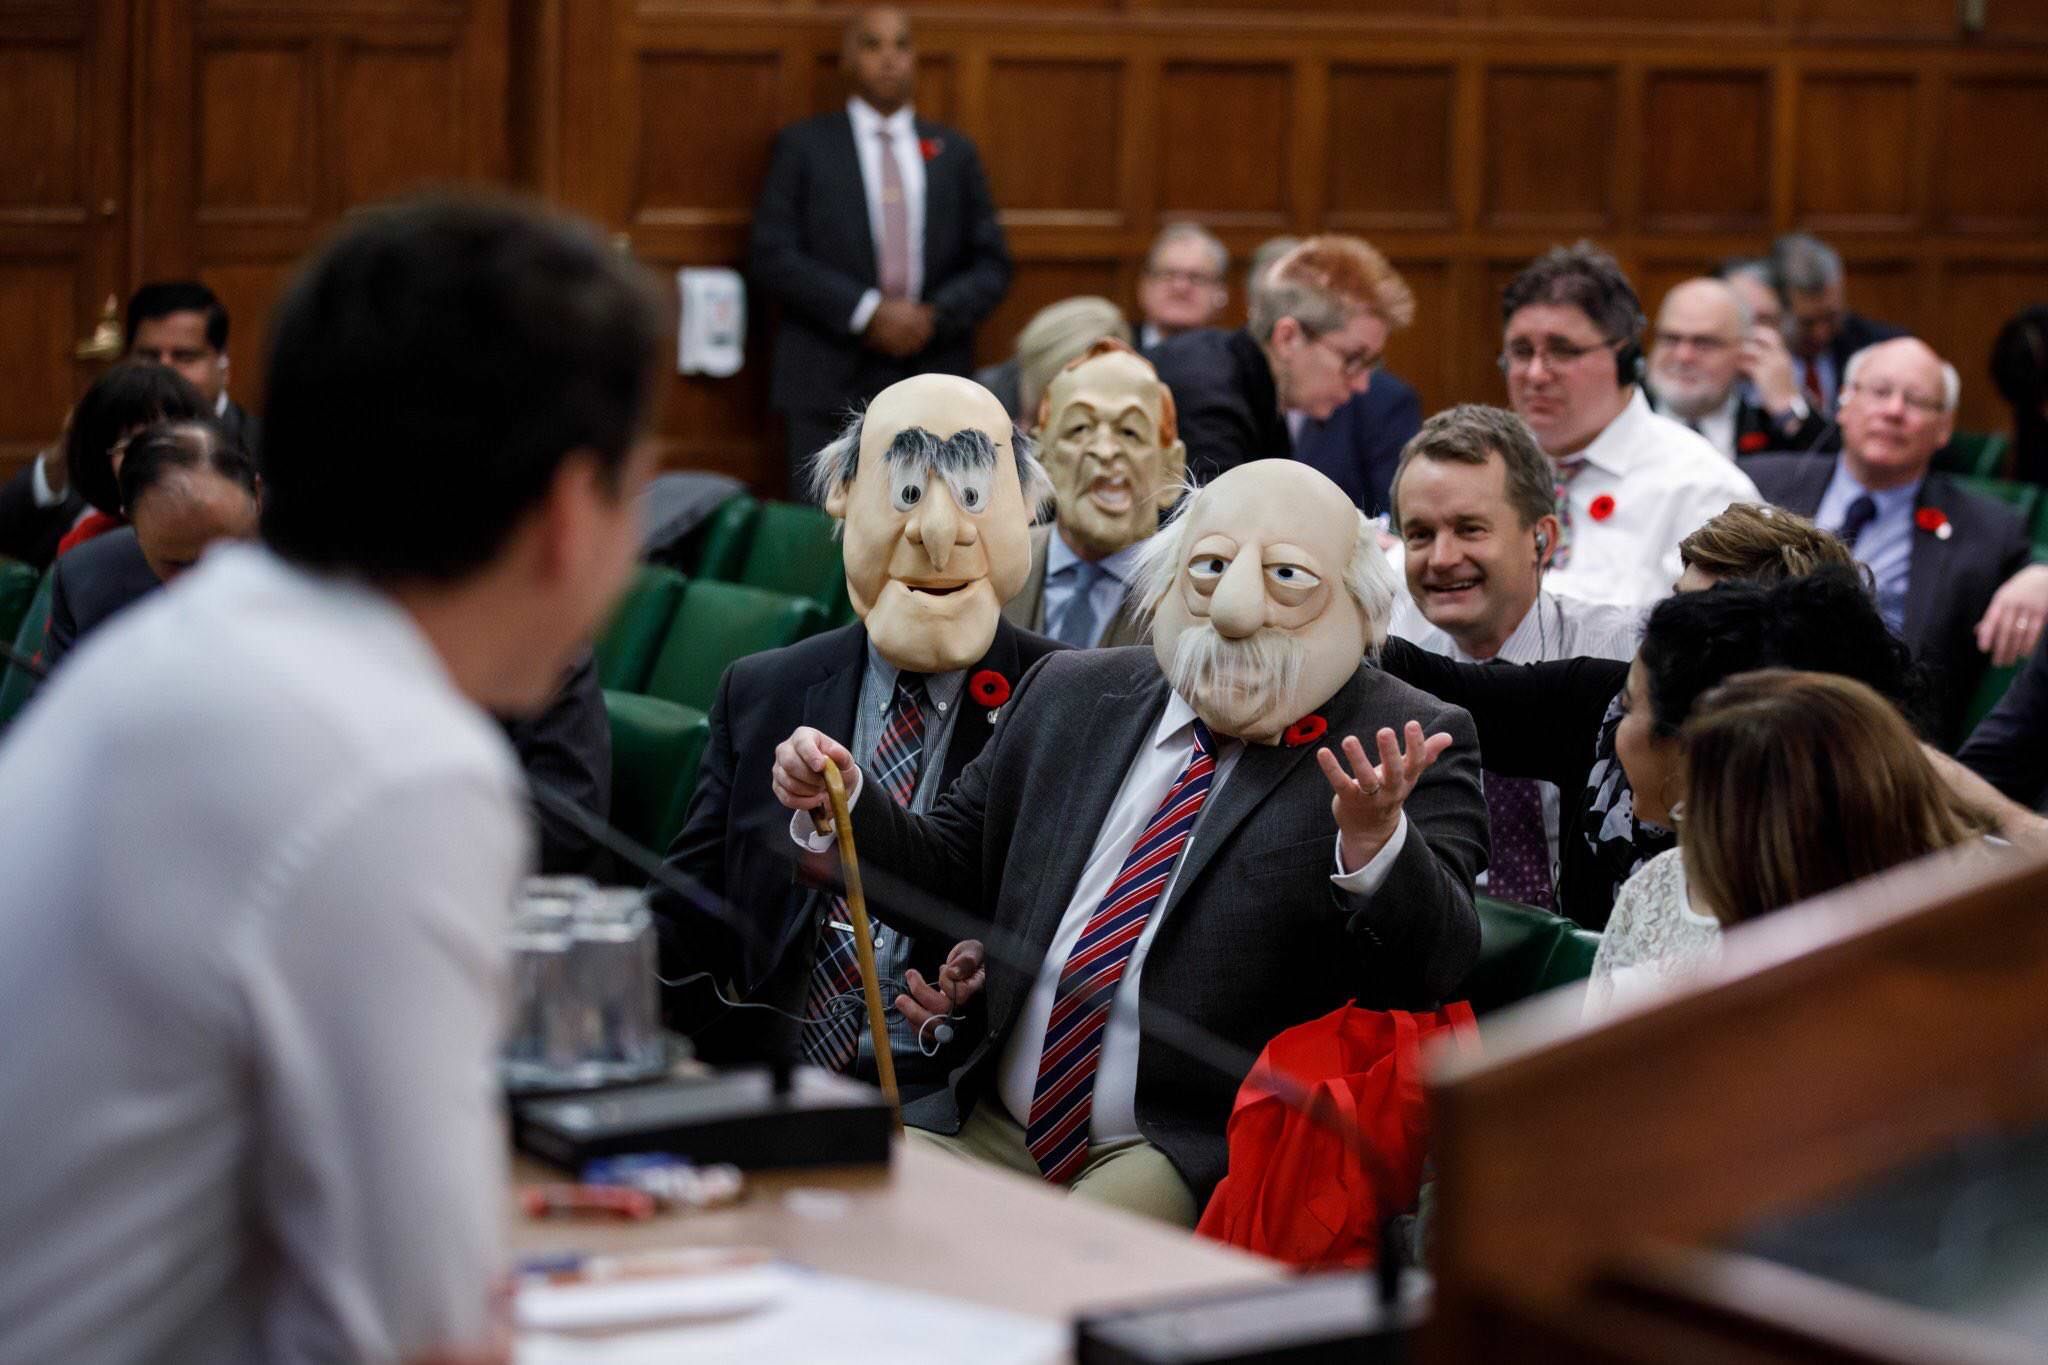 There were some hecklers in Canadian Parliament today